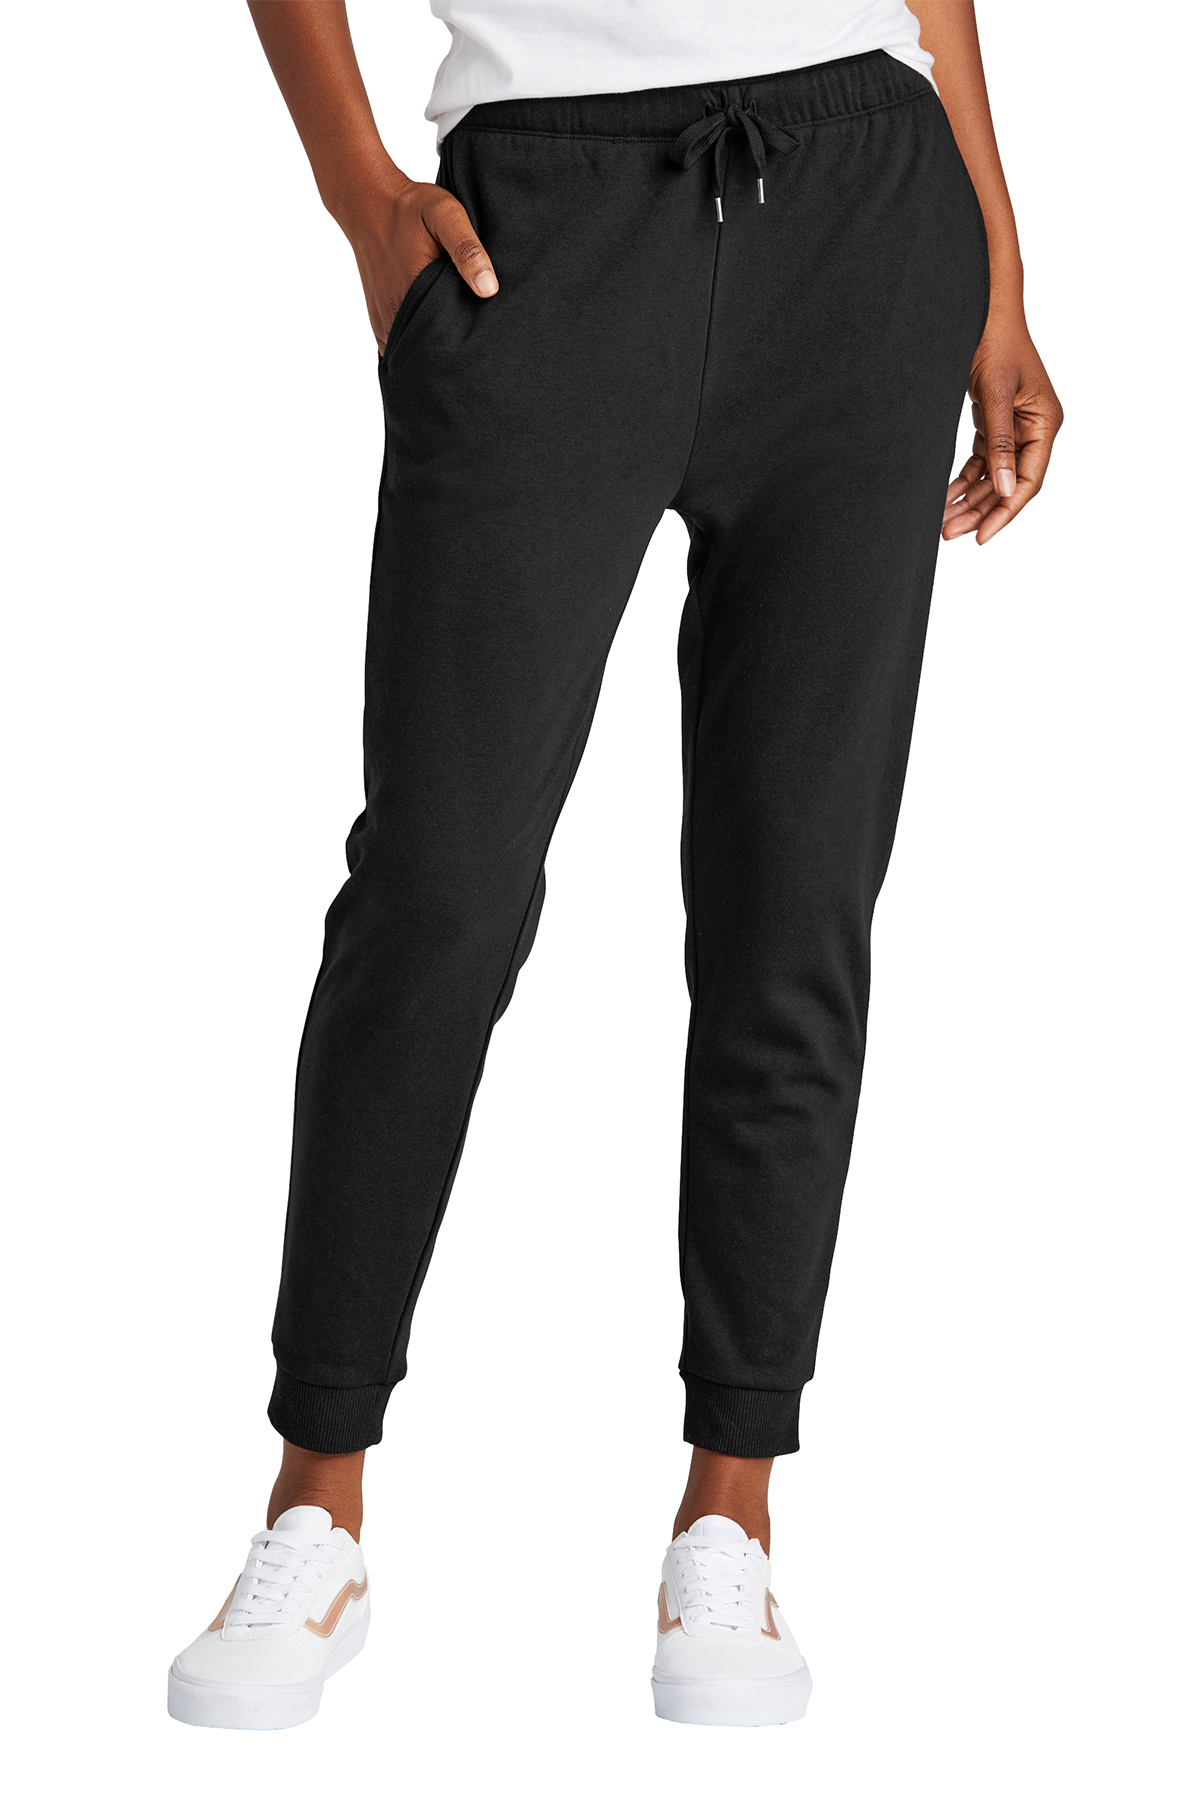 Xersion Therma Fleece Womens Mid Rise Jogger Pant